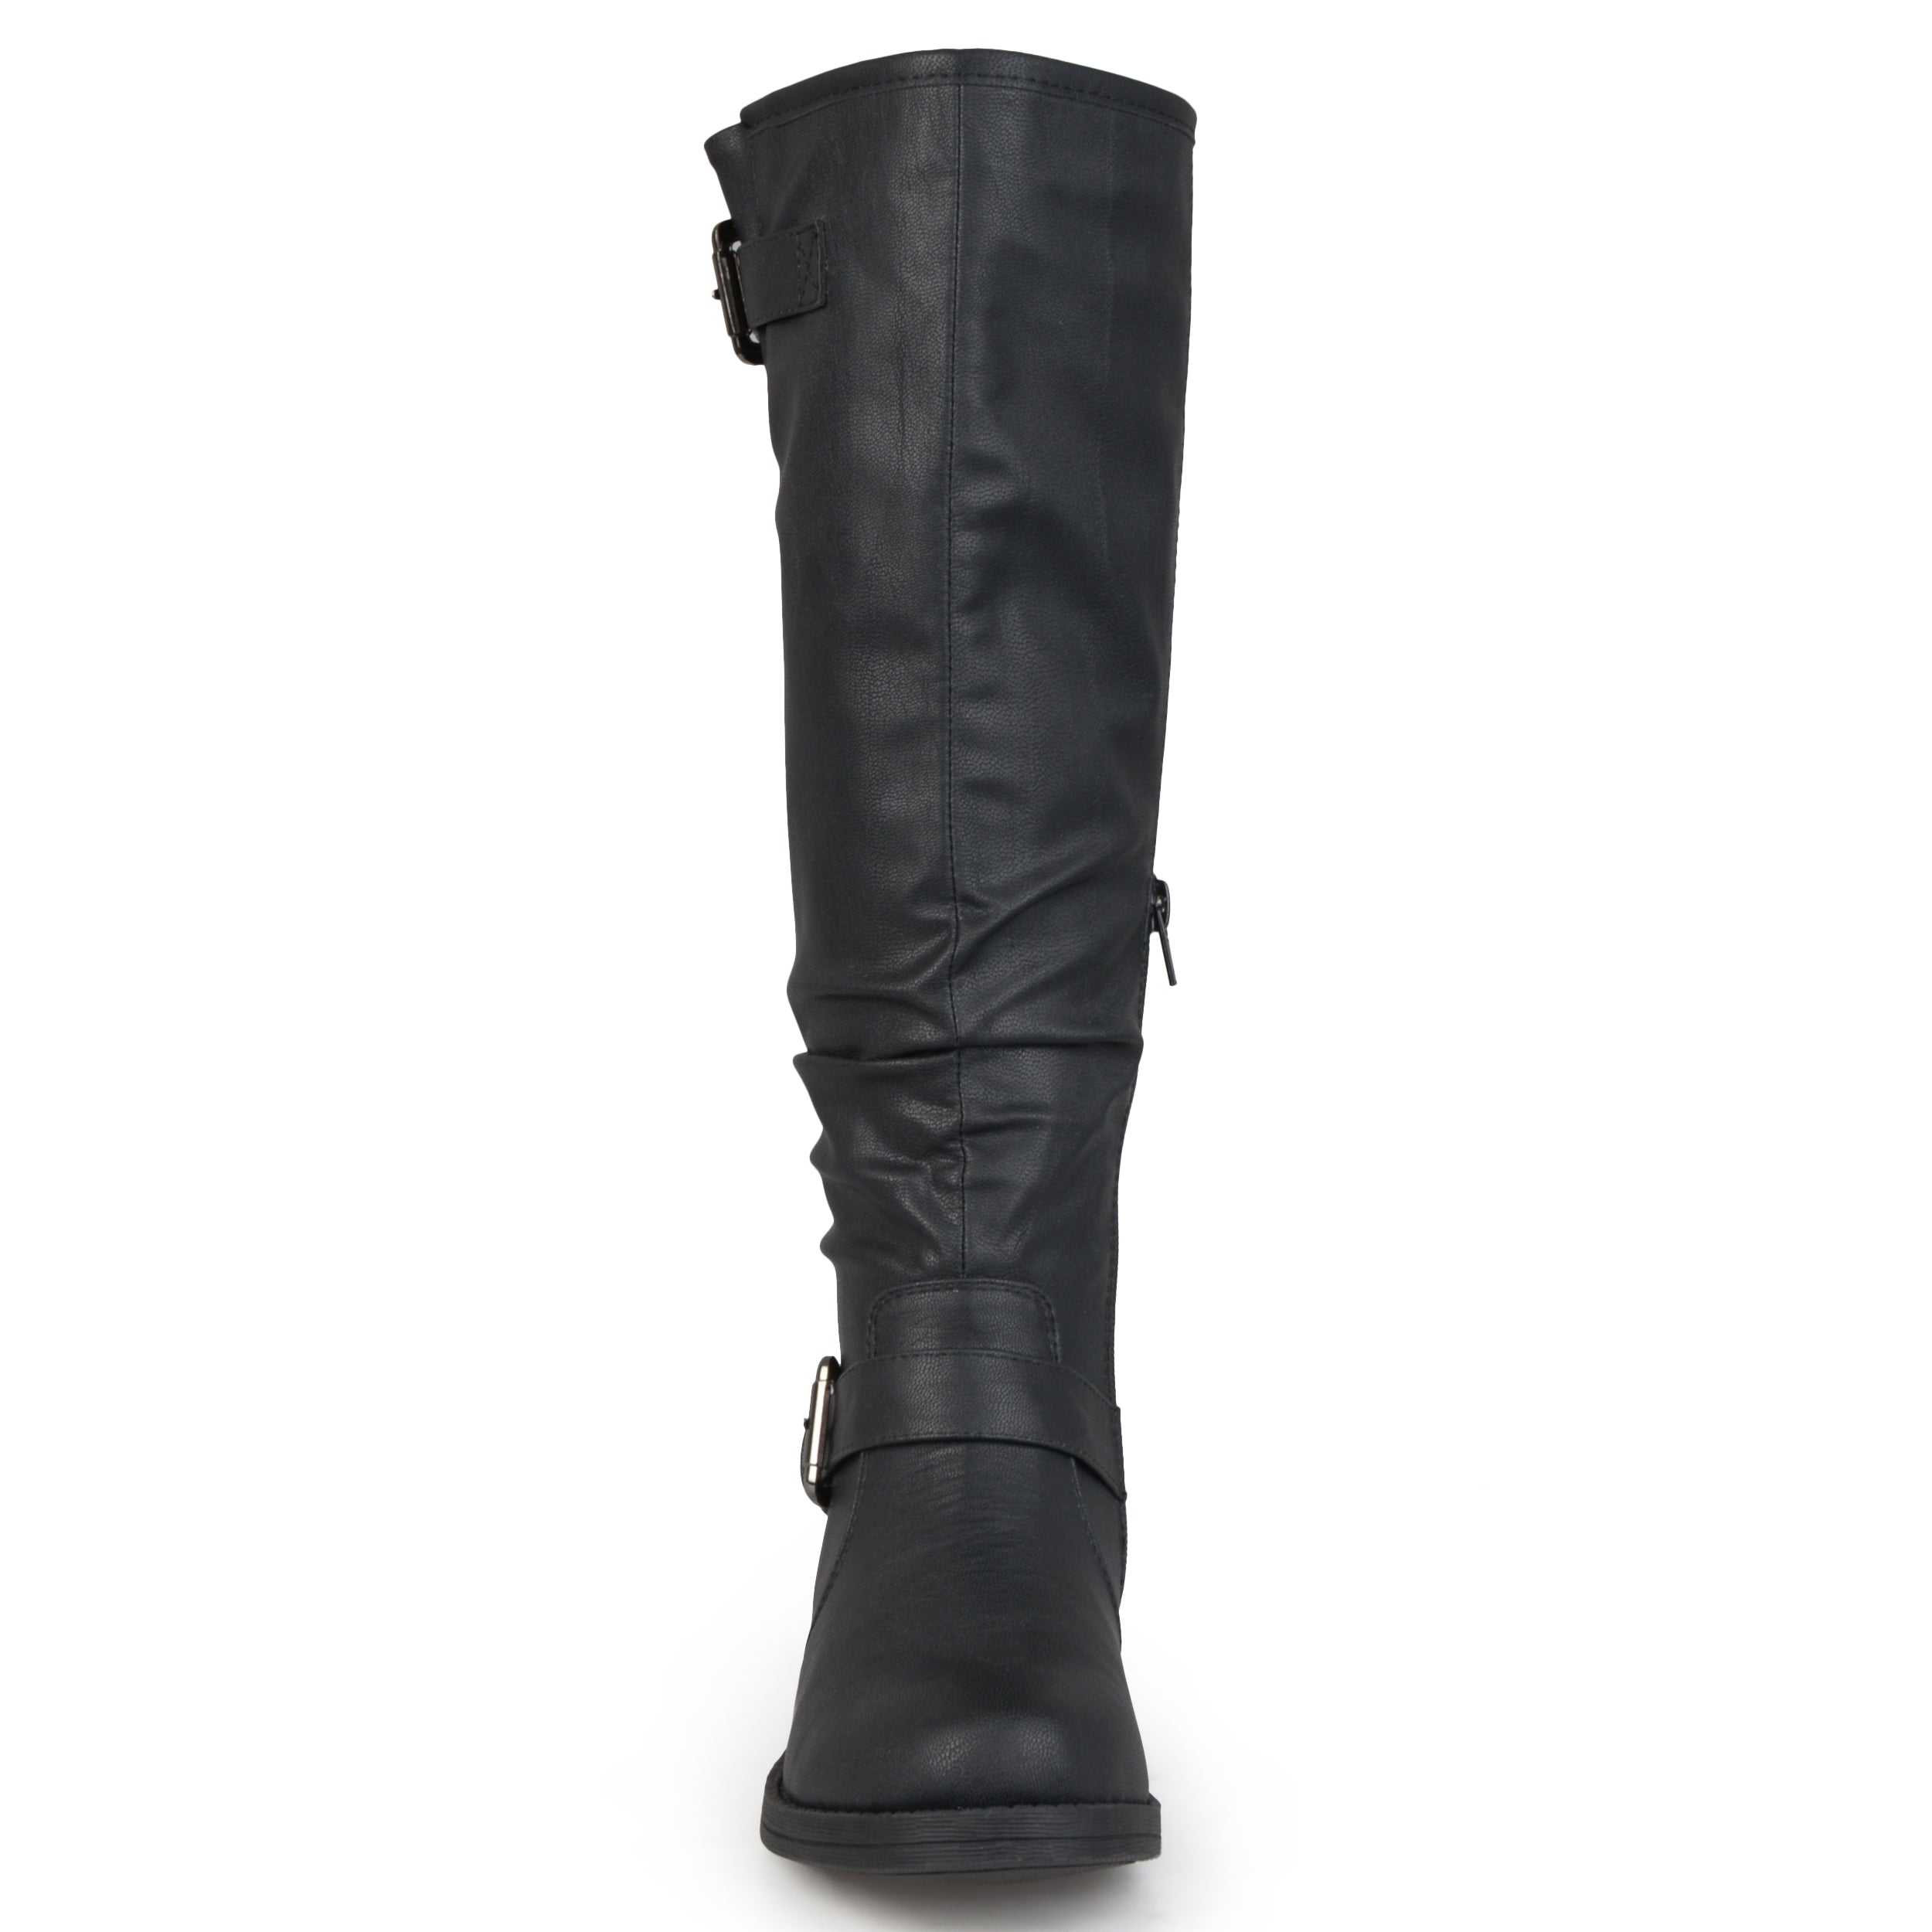 Stormy Boot | Women's Riding Boots | Journee Collection